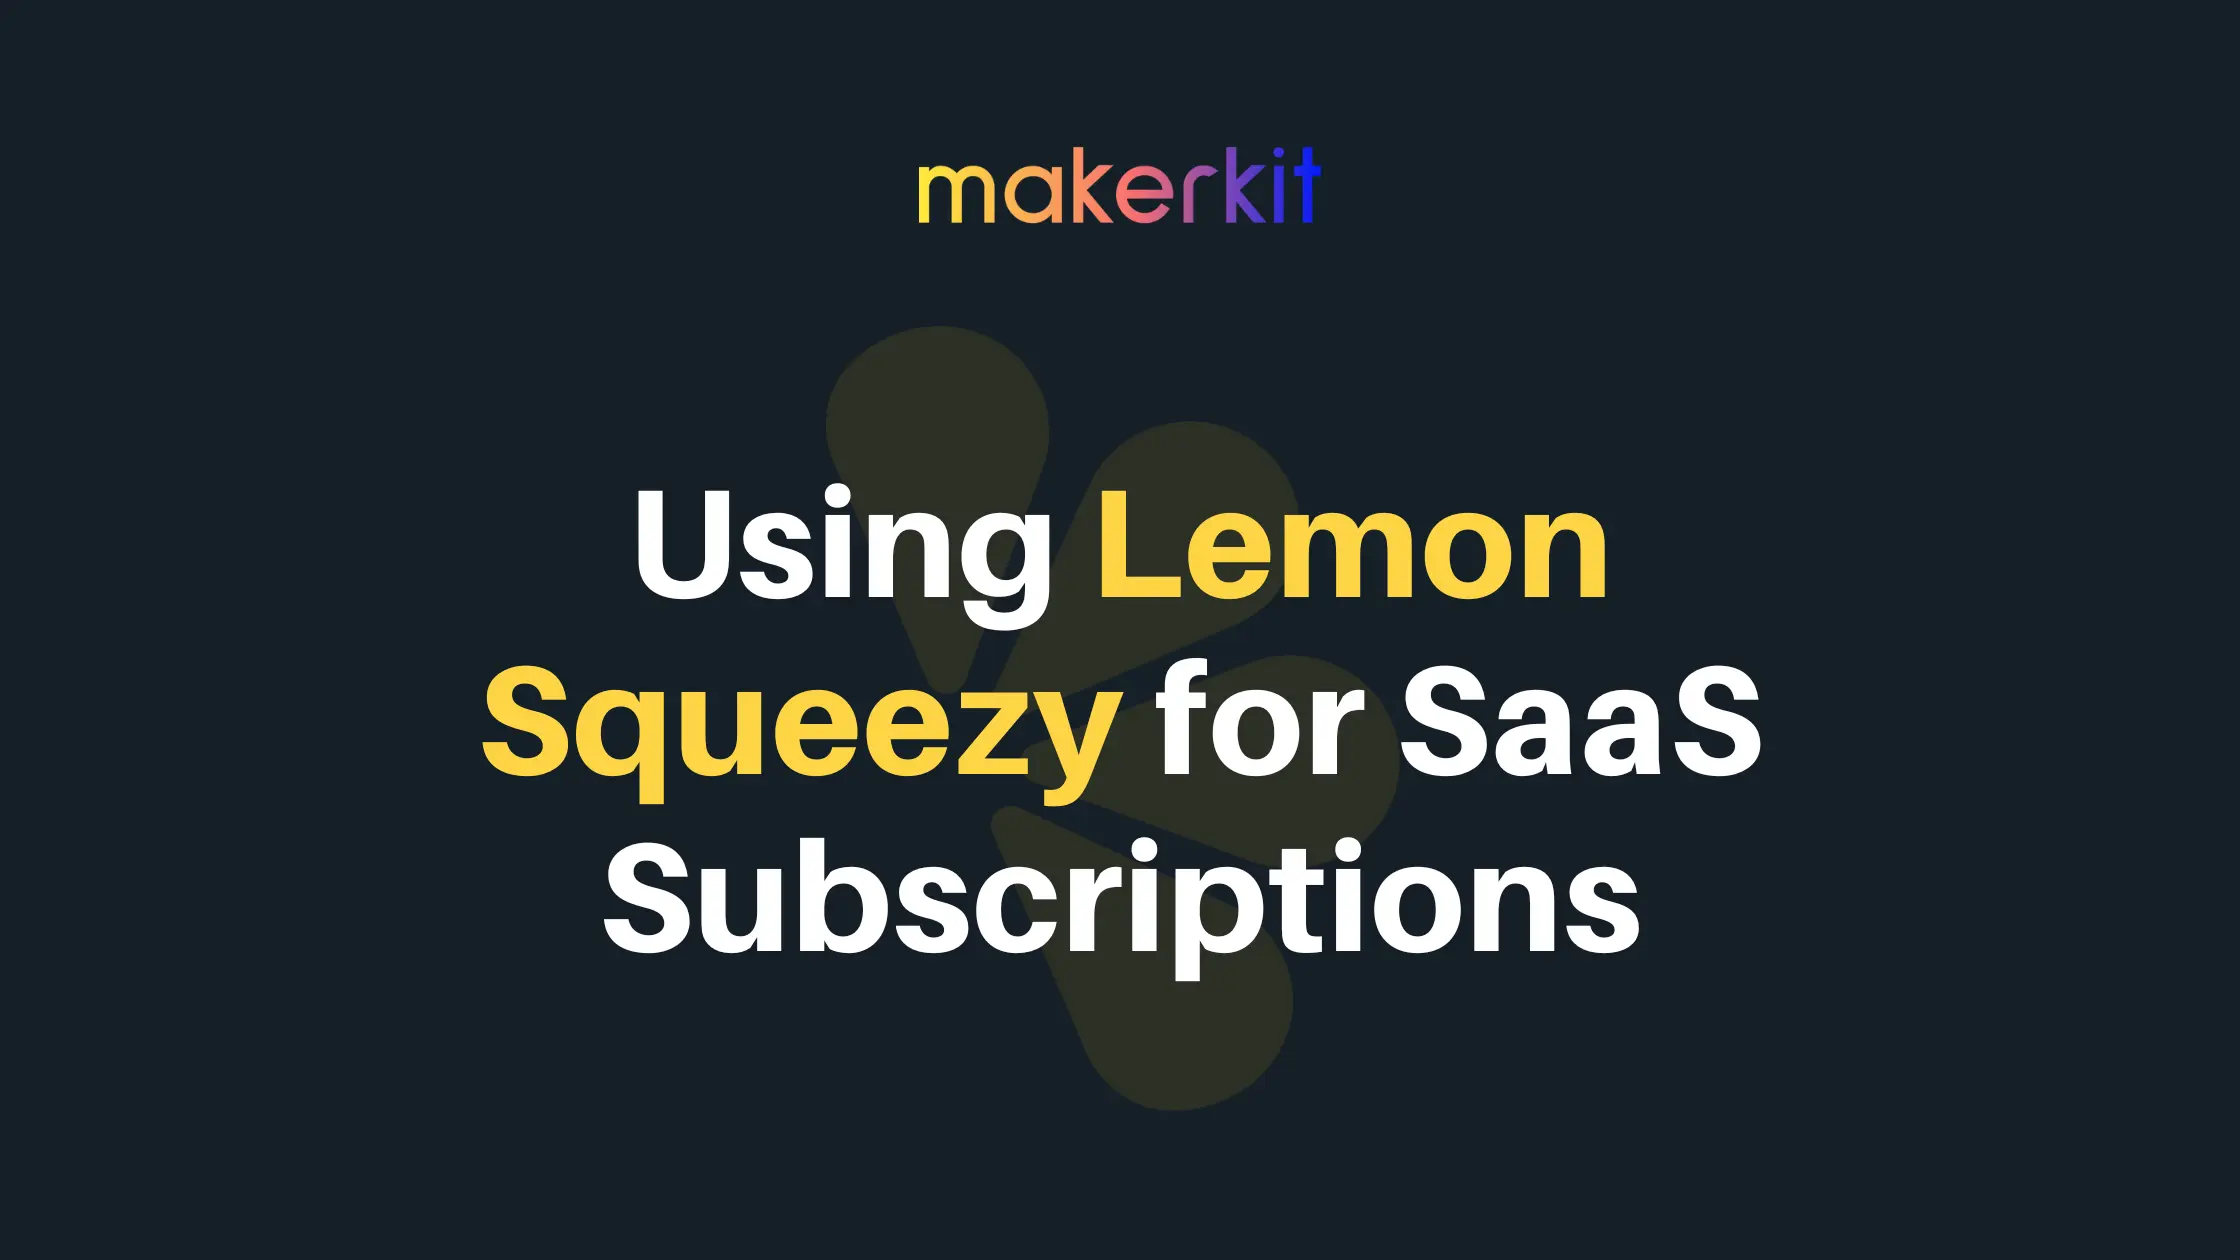 Cover Image for Using Lemon Squeezy for SaaS subscriptions with Makerkit